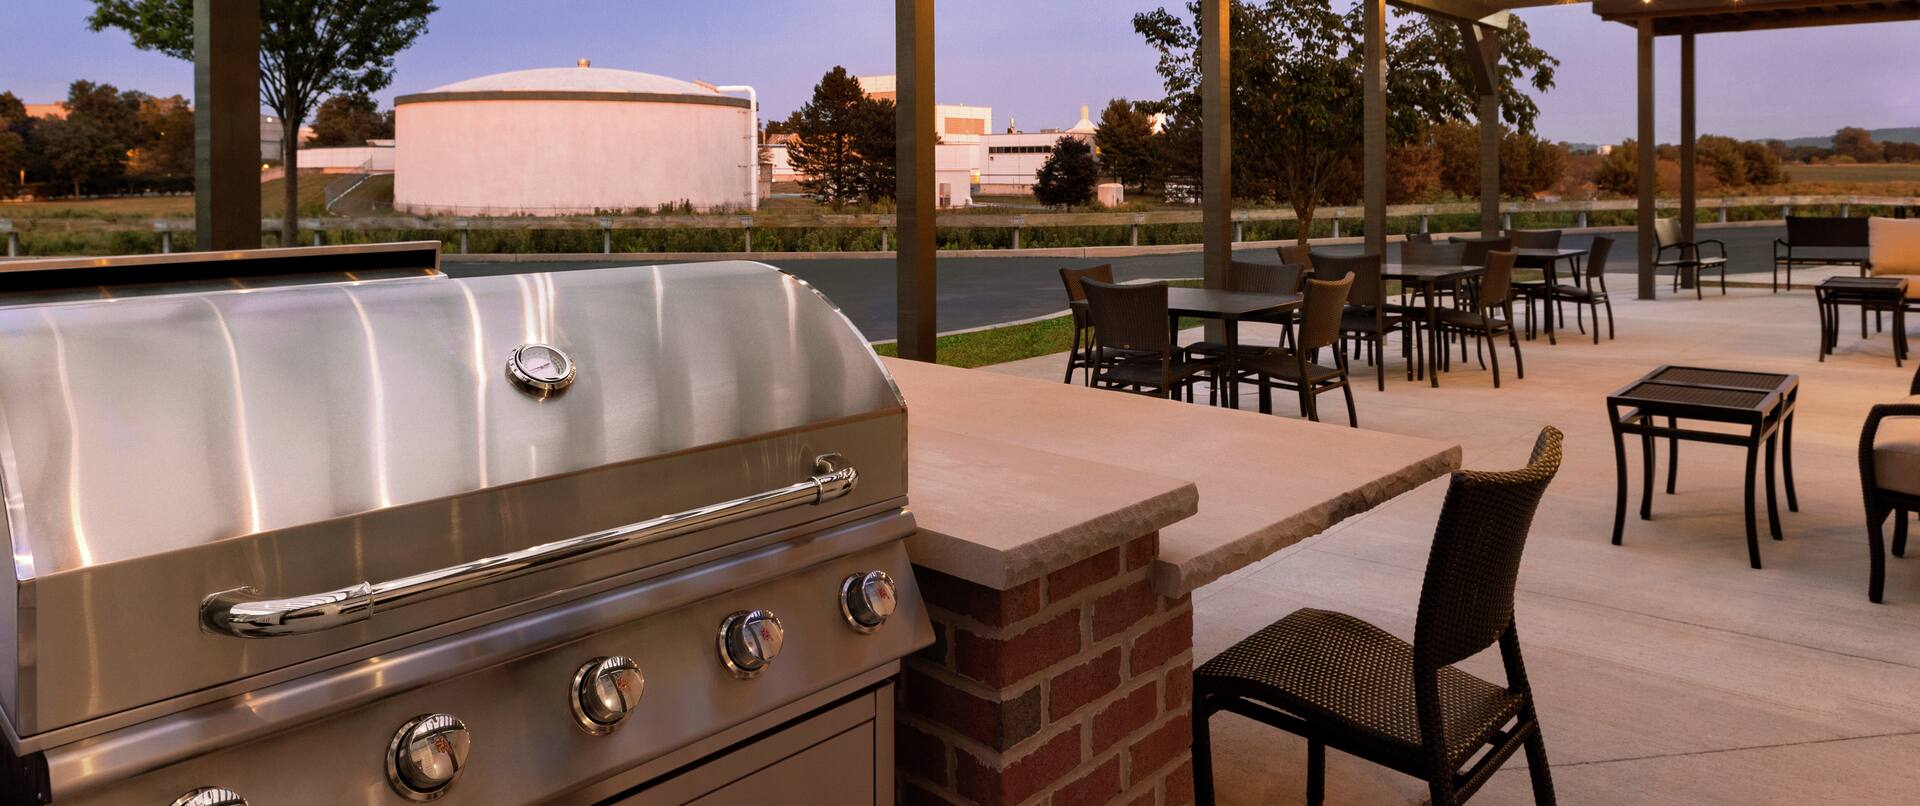 Outdoor Patio with BBQ Grill